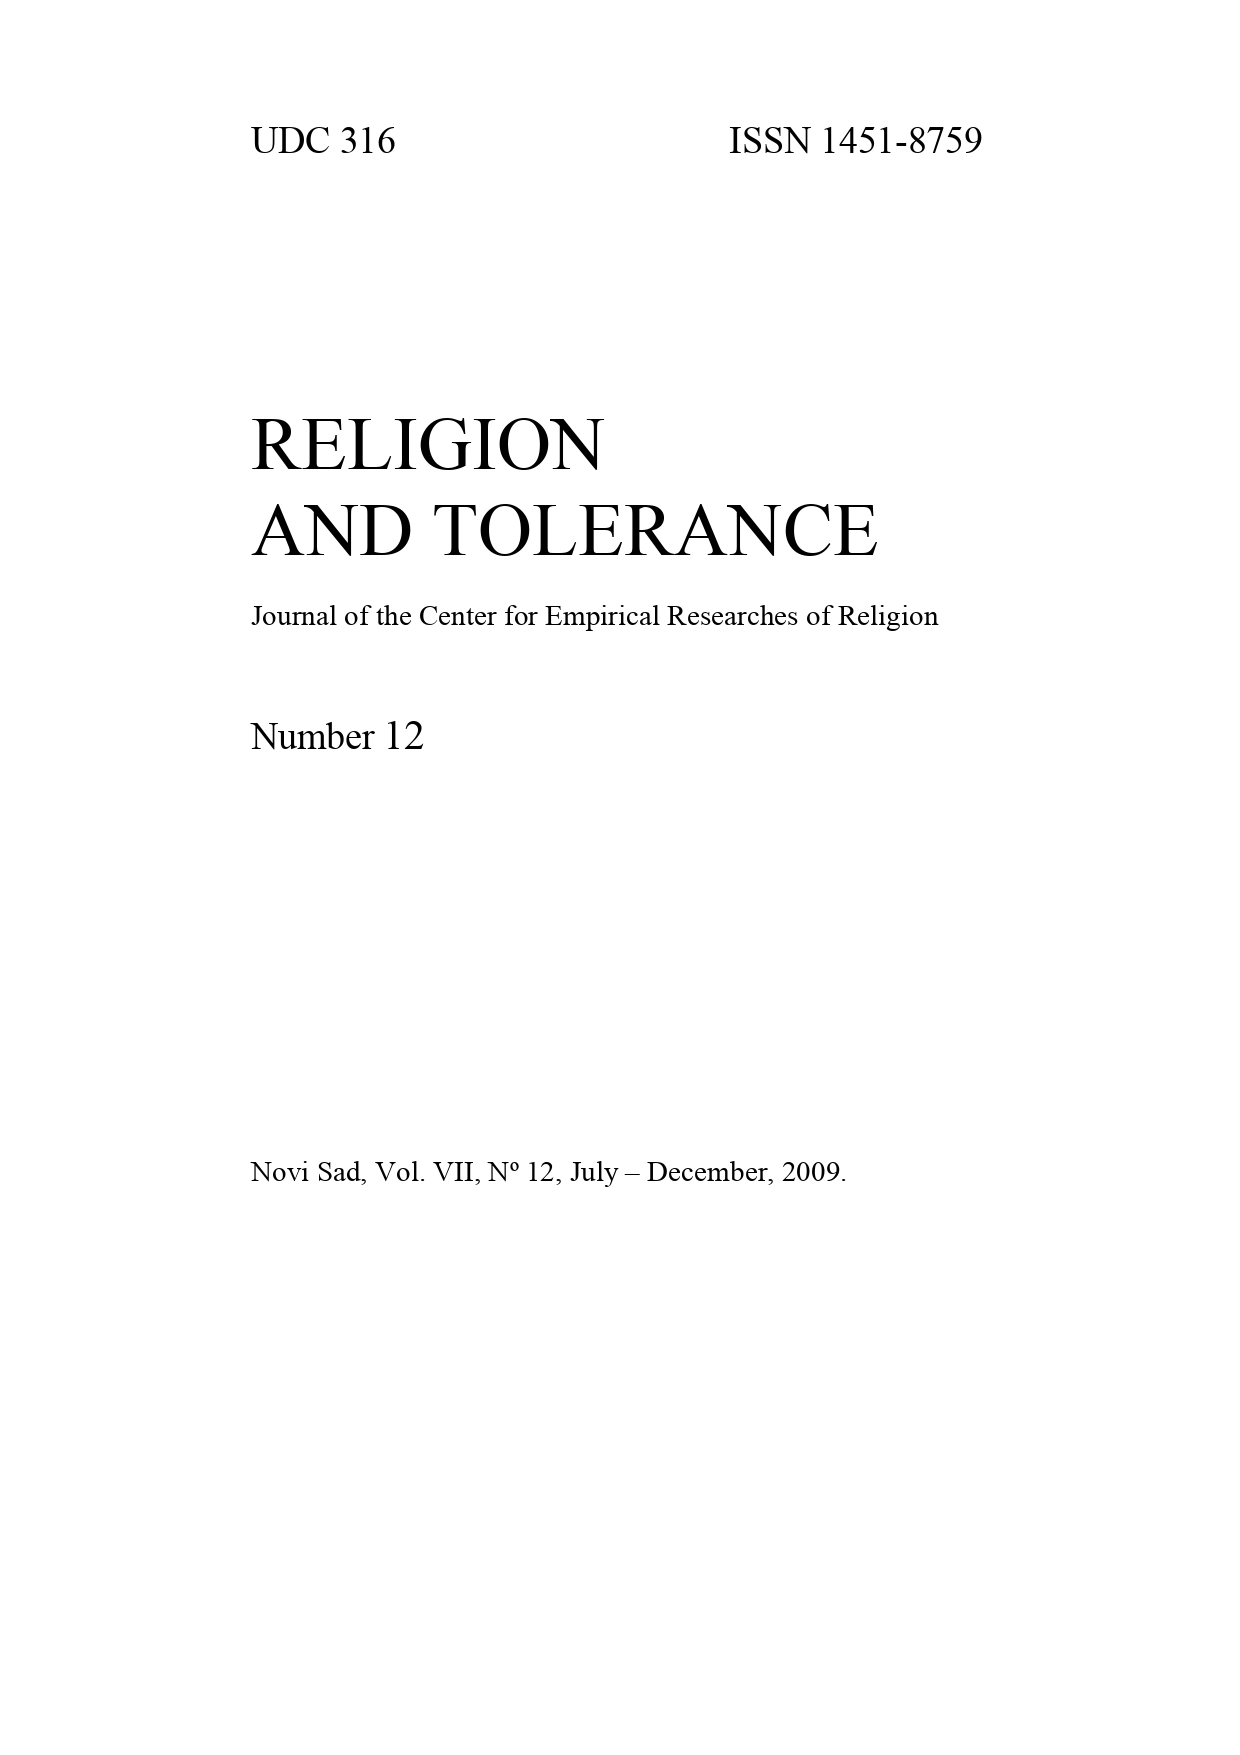 NEUTRALITY OF PUBLIC AUTHORITIES AND RELIGION